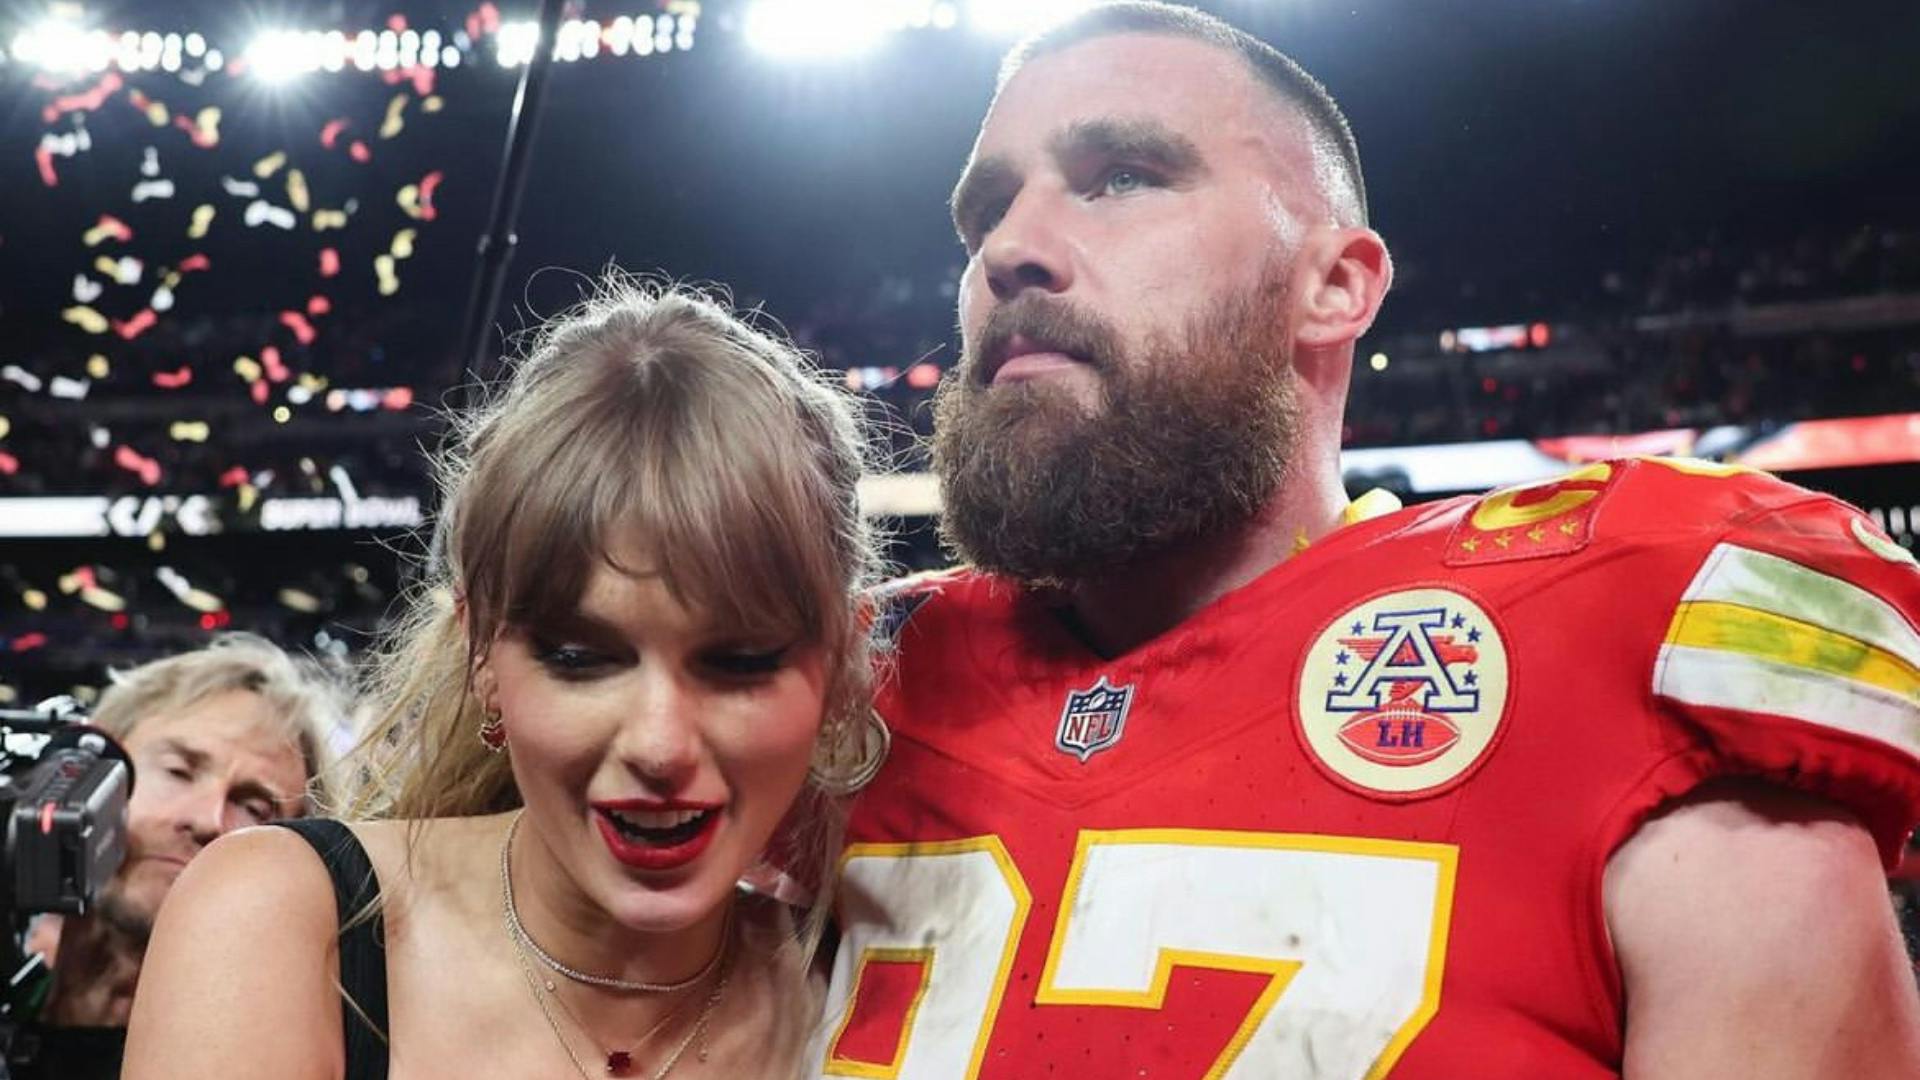 Bejeweled: Taylor Swift gets the "W" in first Super Bowl appearance